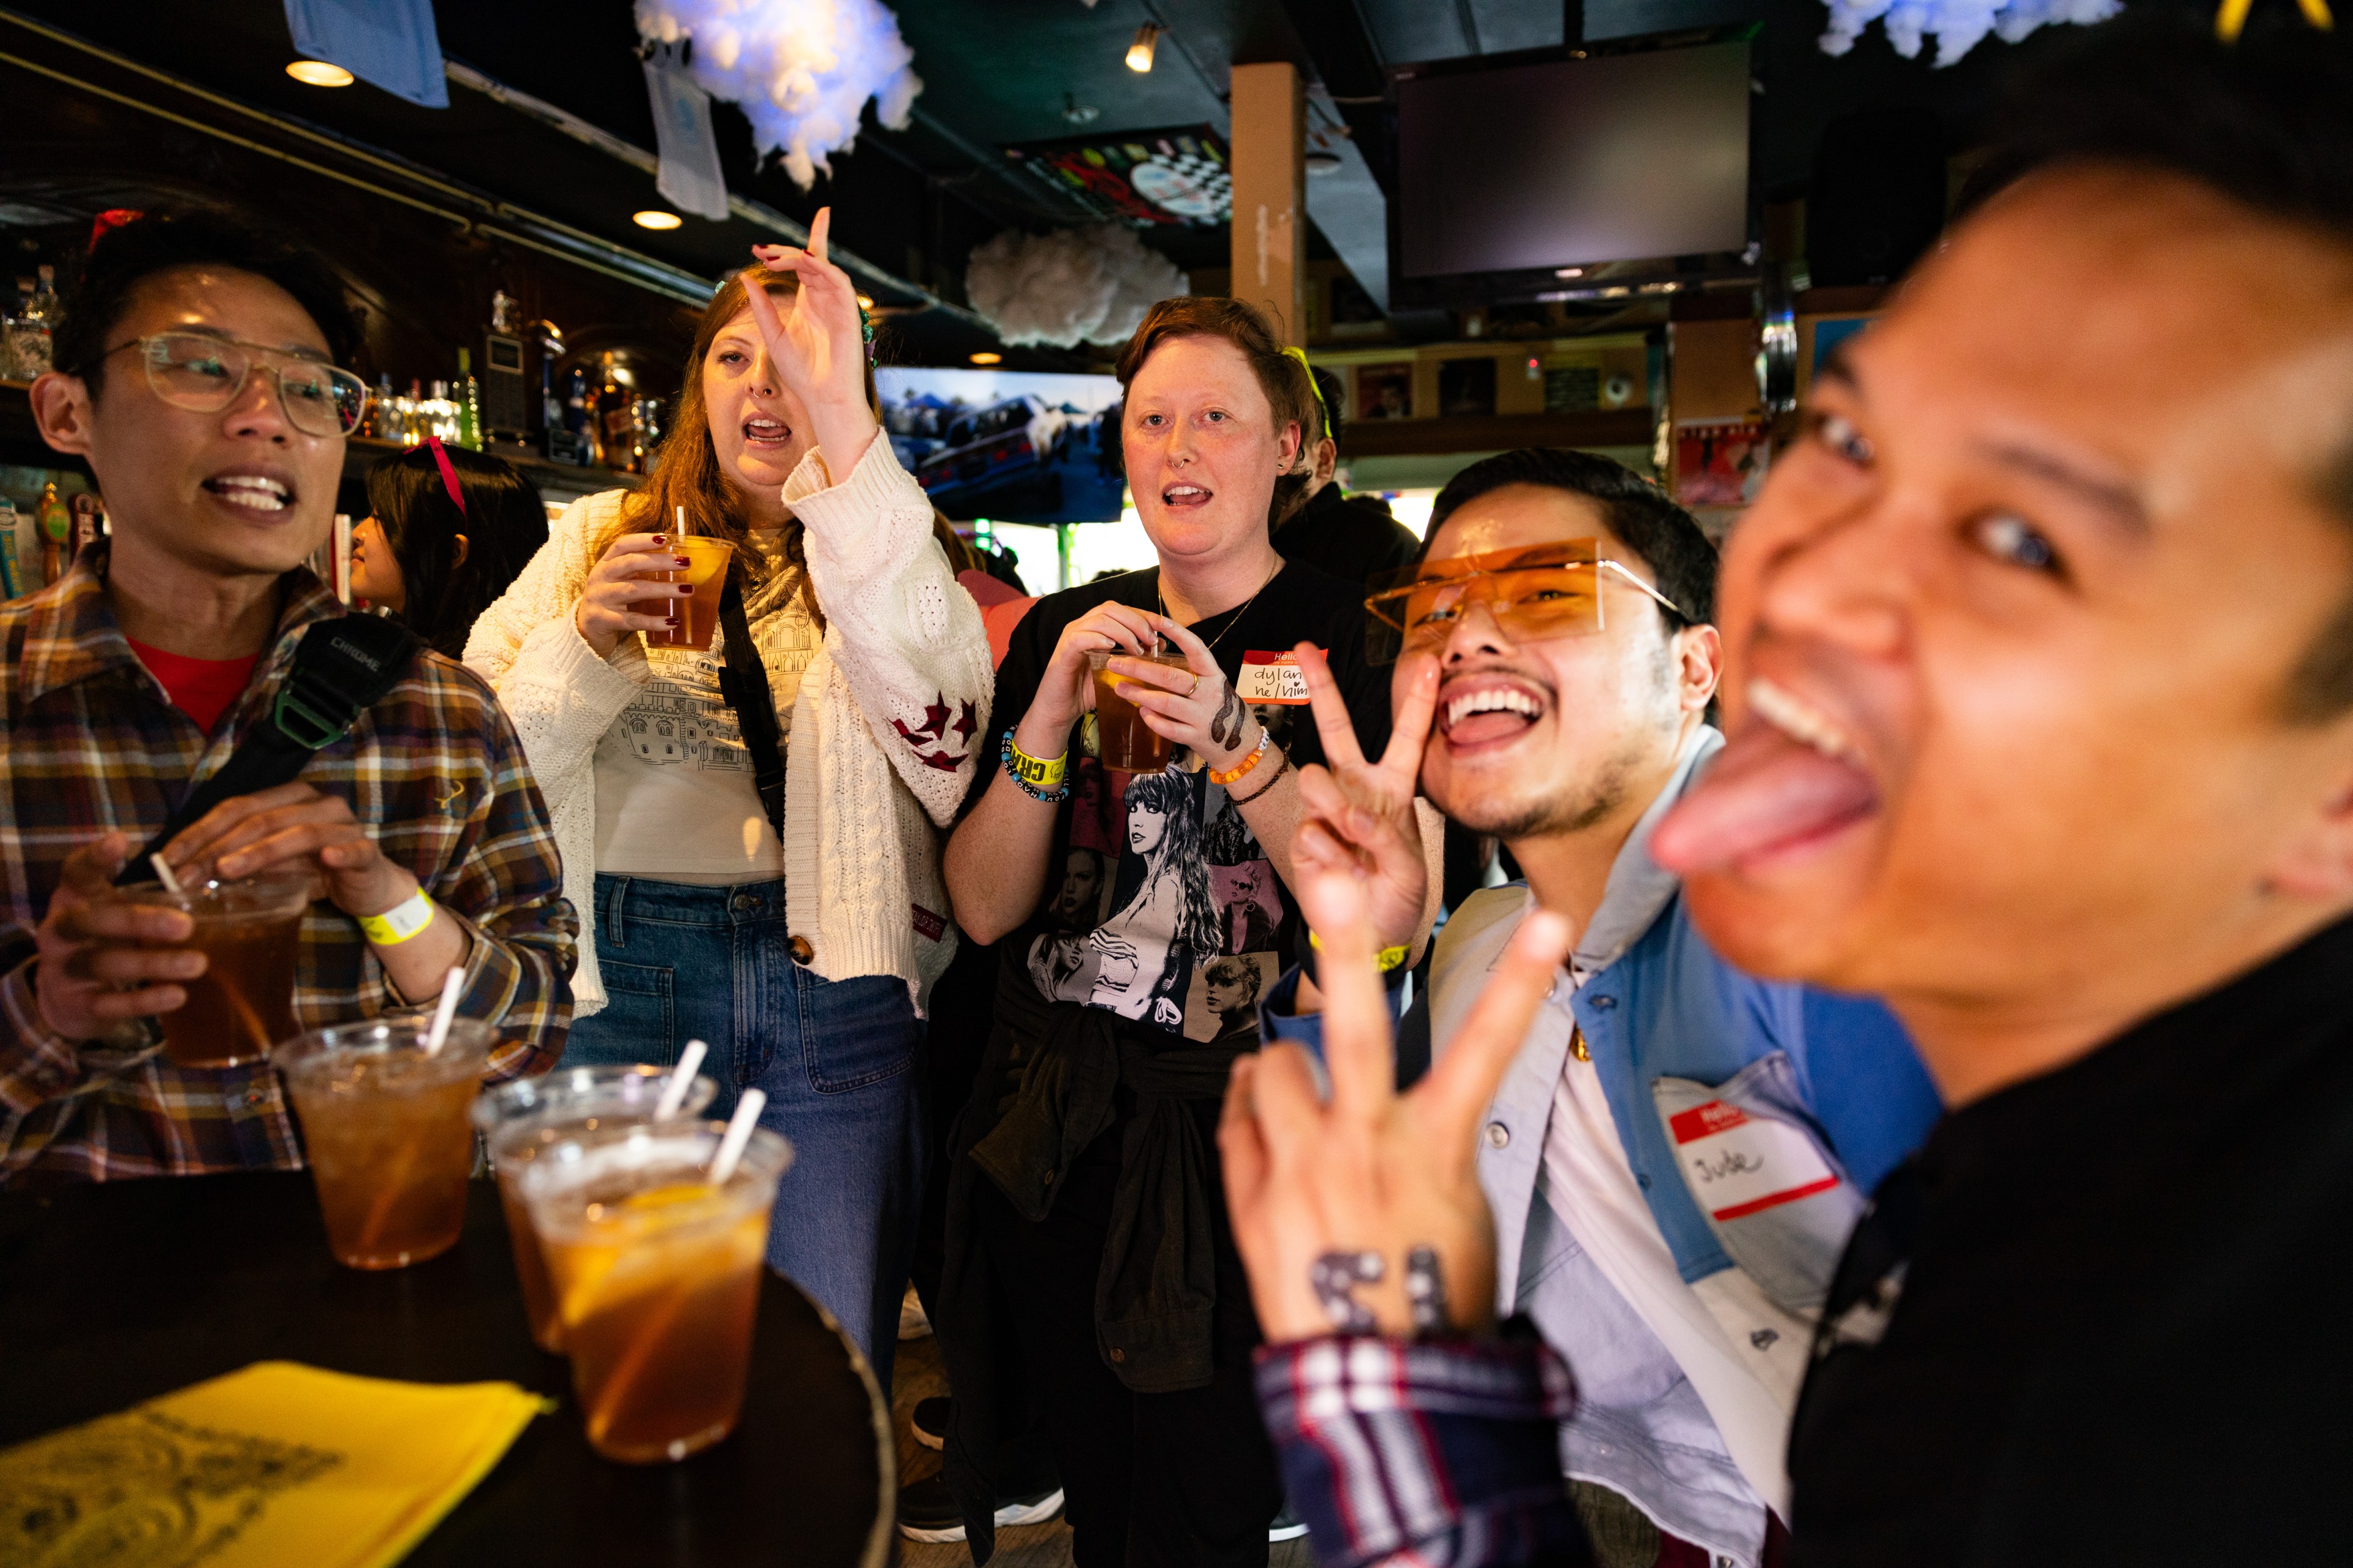 Four women smile and make goof poses at a bar